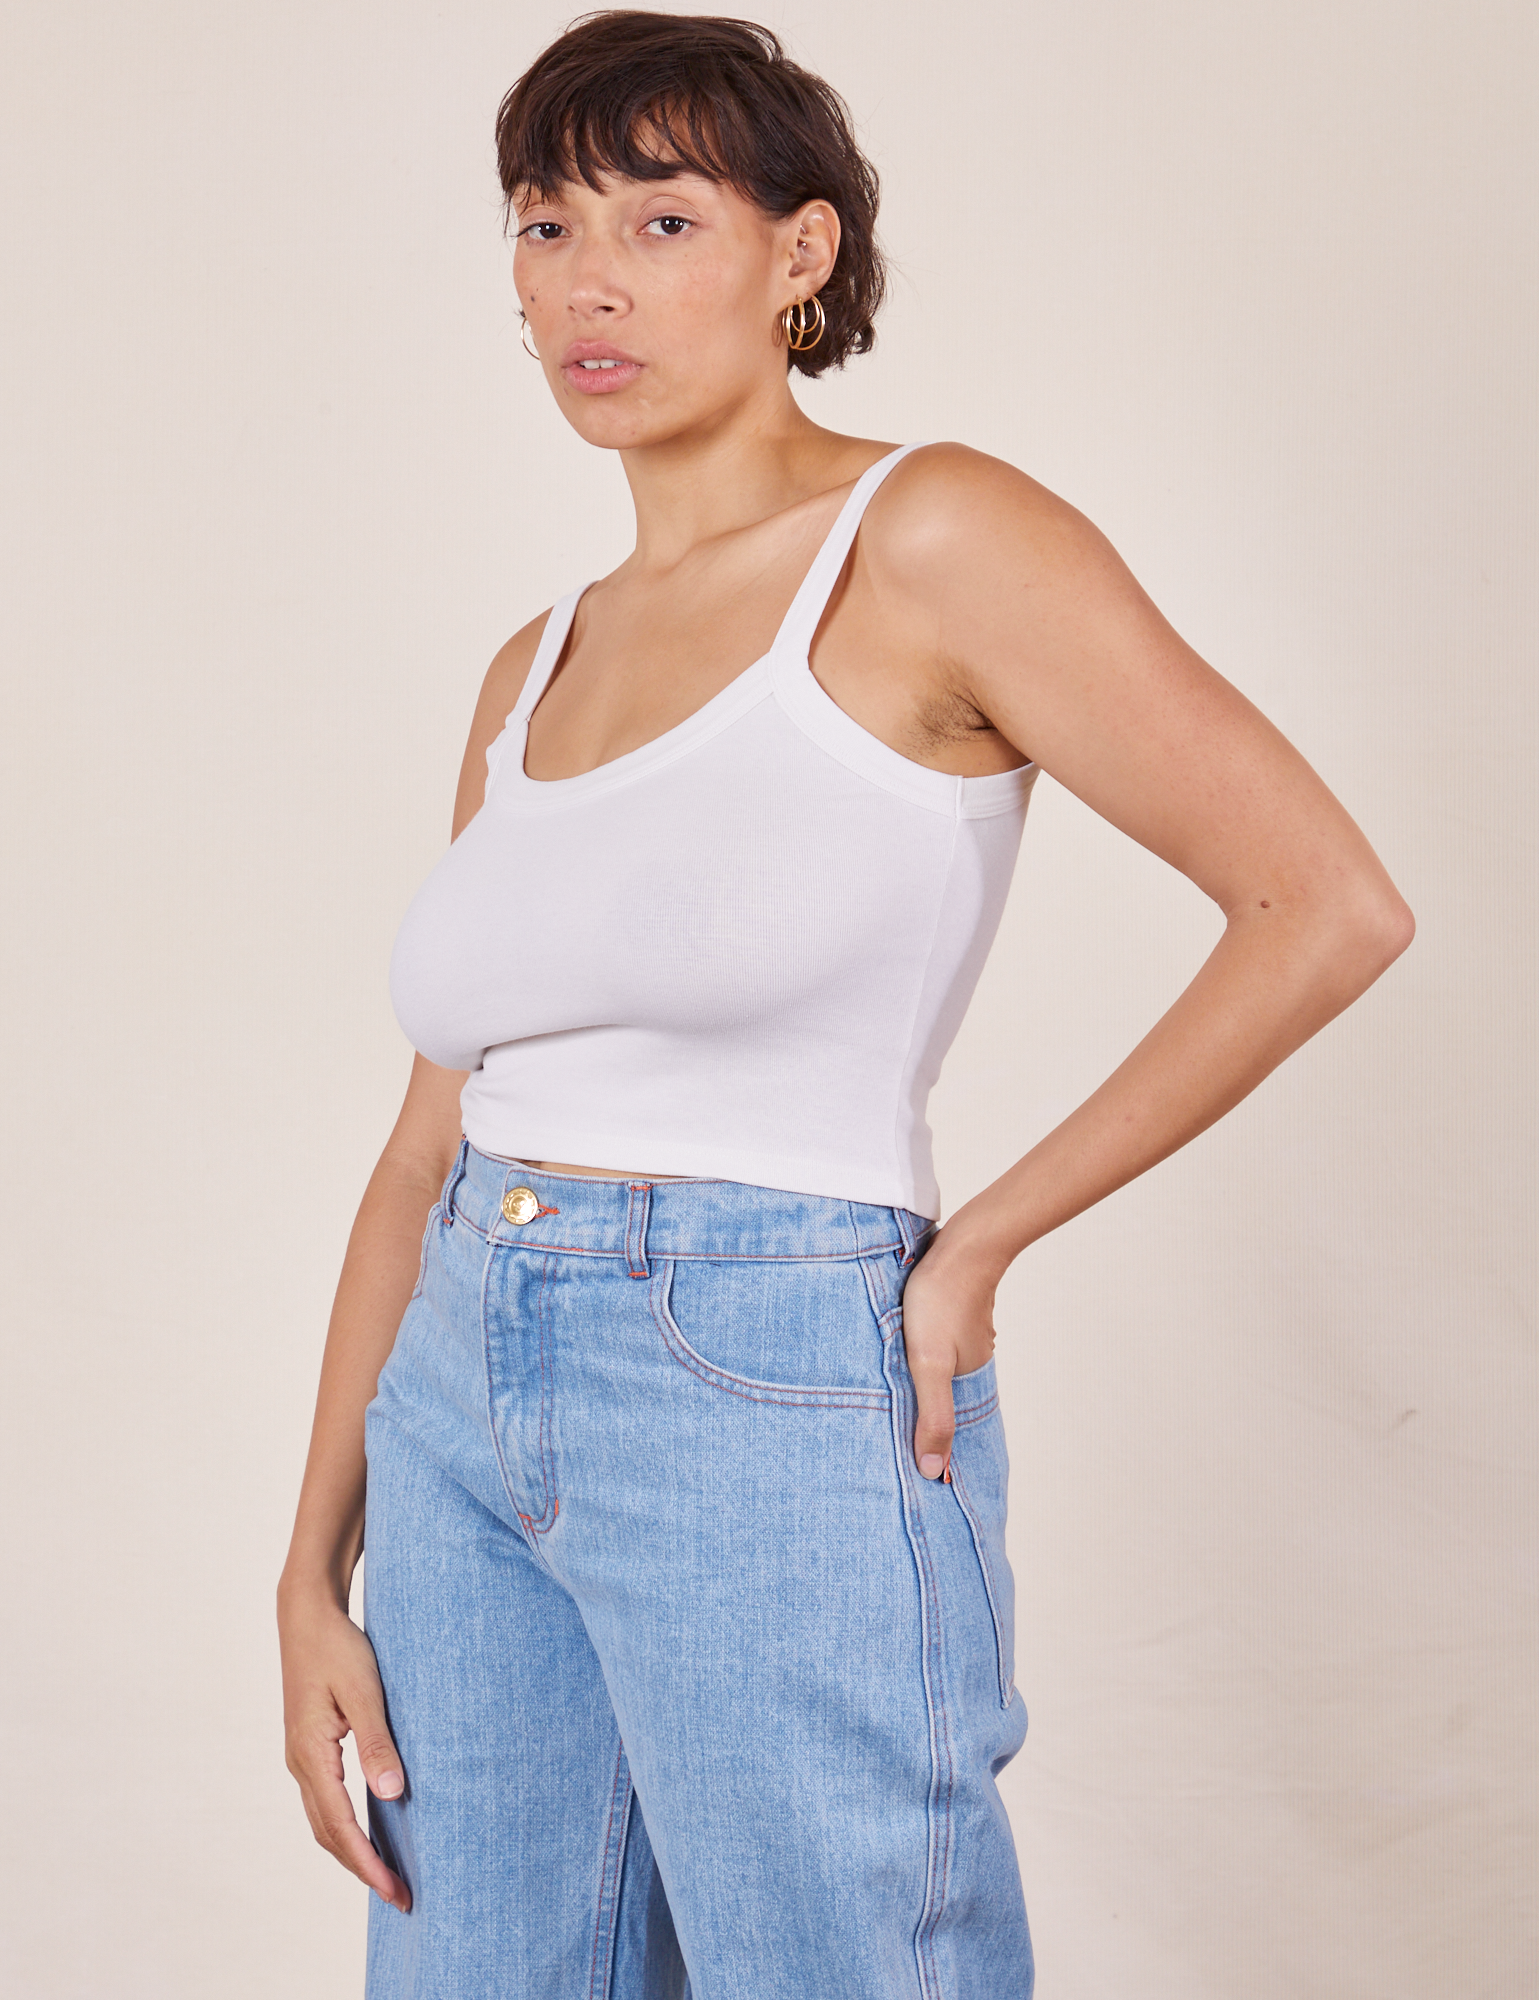 Tiara is 5&#39;4&quot; and wearing XS Cropped Cami in Vintage Tee Off-White paired with light wash Sailor Jeans